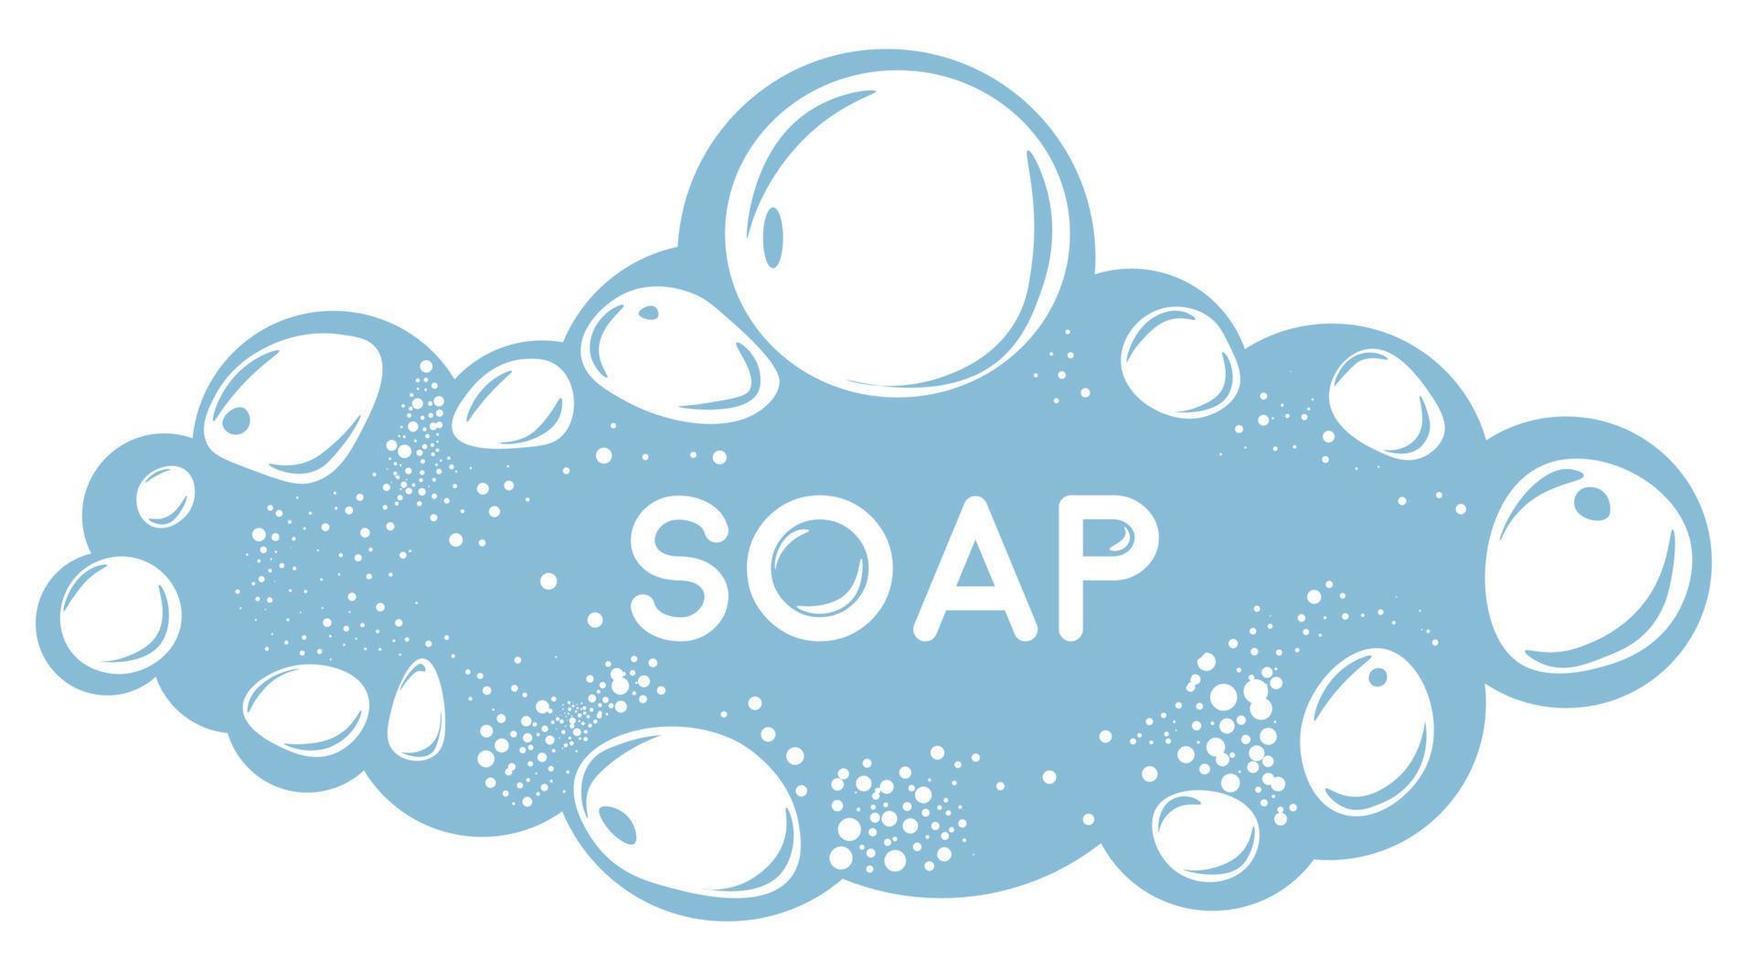 Soapsuds laundry or bath soapy bubbles, hygiene and cosmetics vector